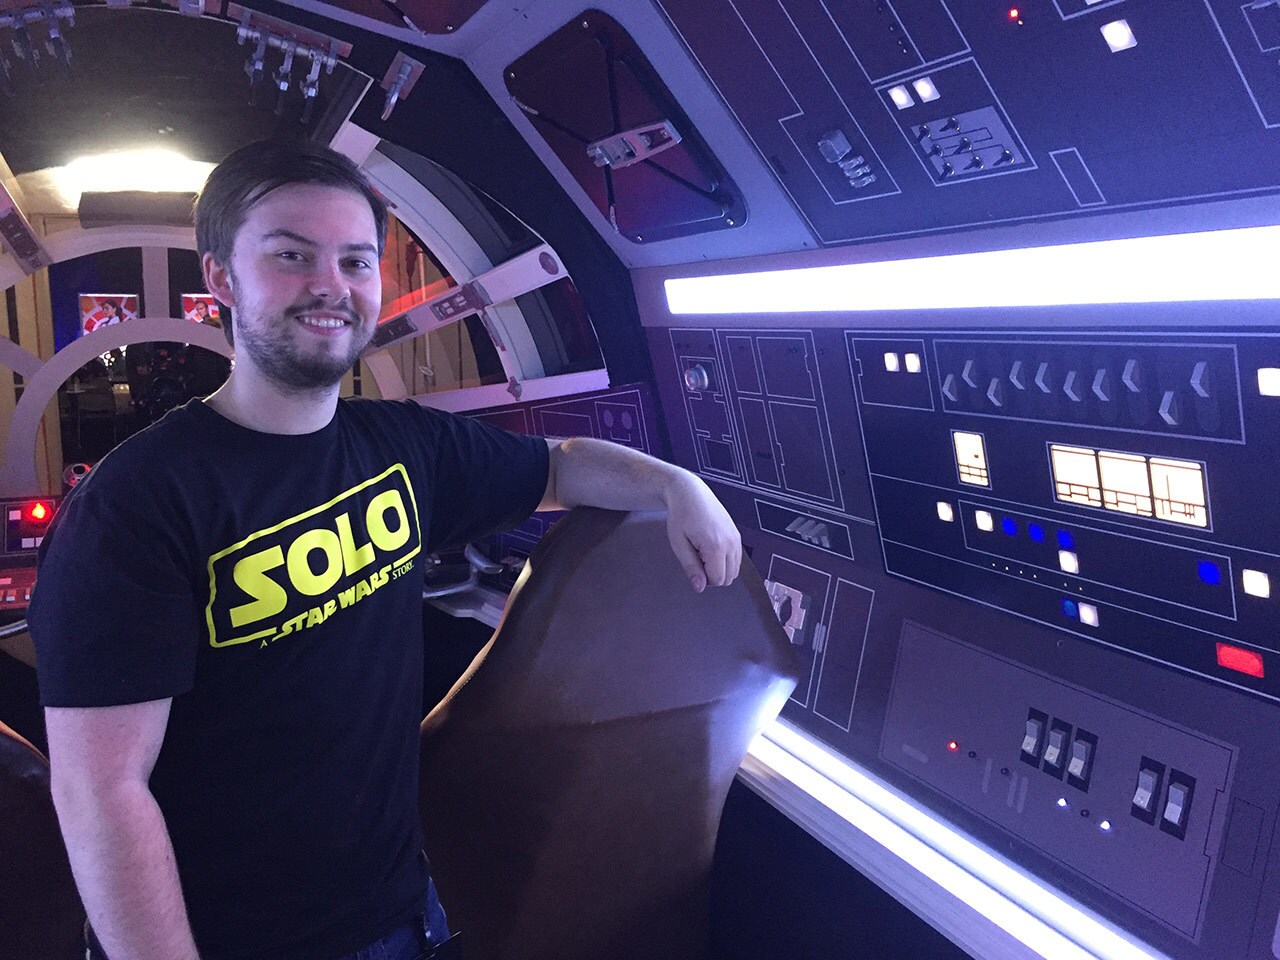 Builder Kevin Cembolista poses next to a control panel on the Millennium Falcon Experience.